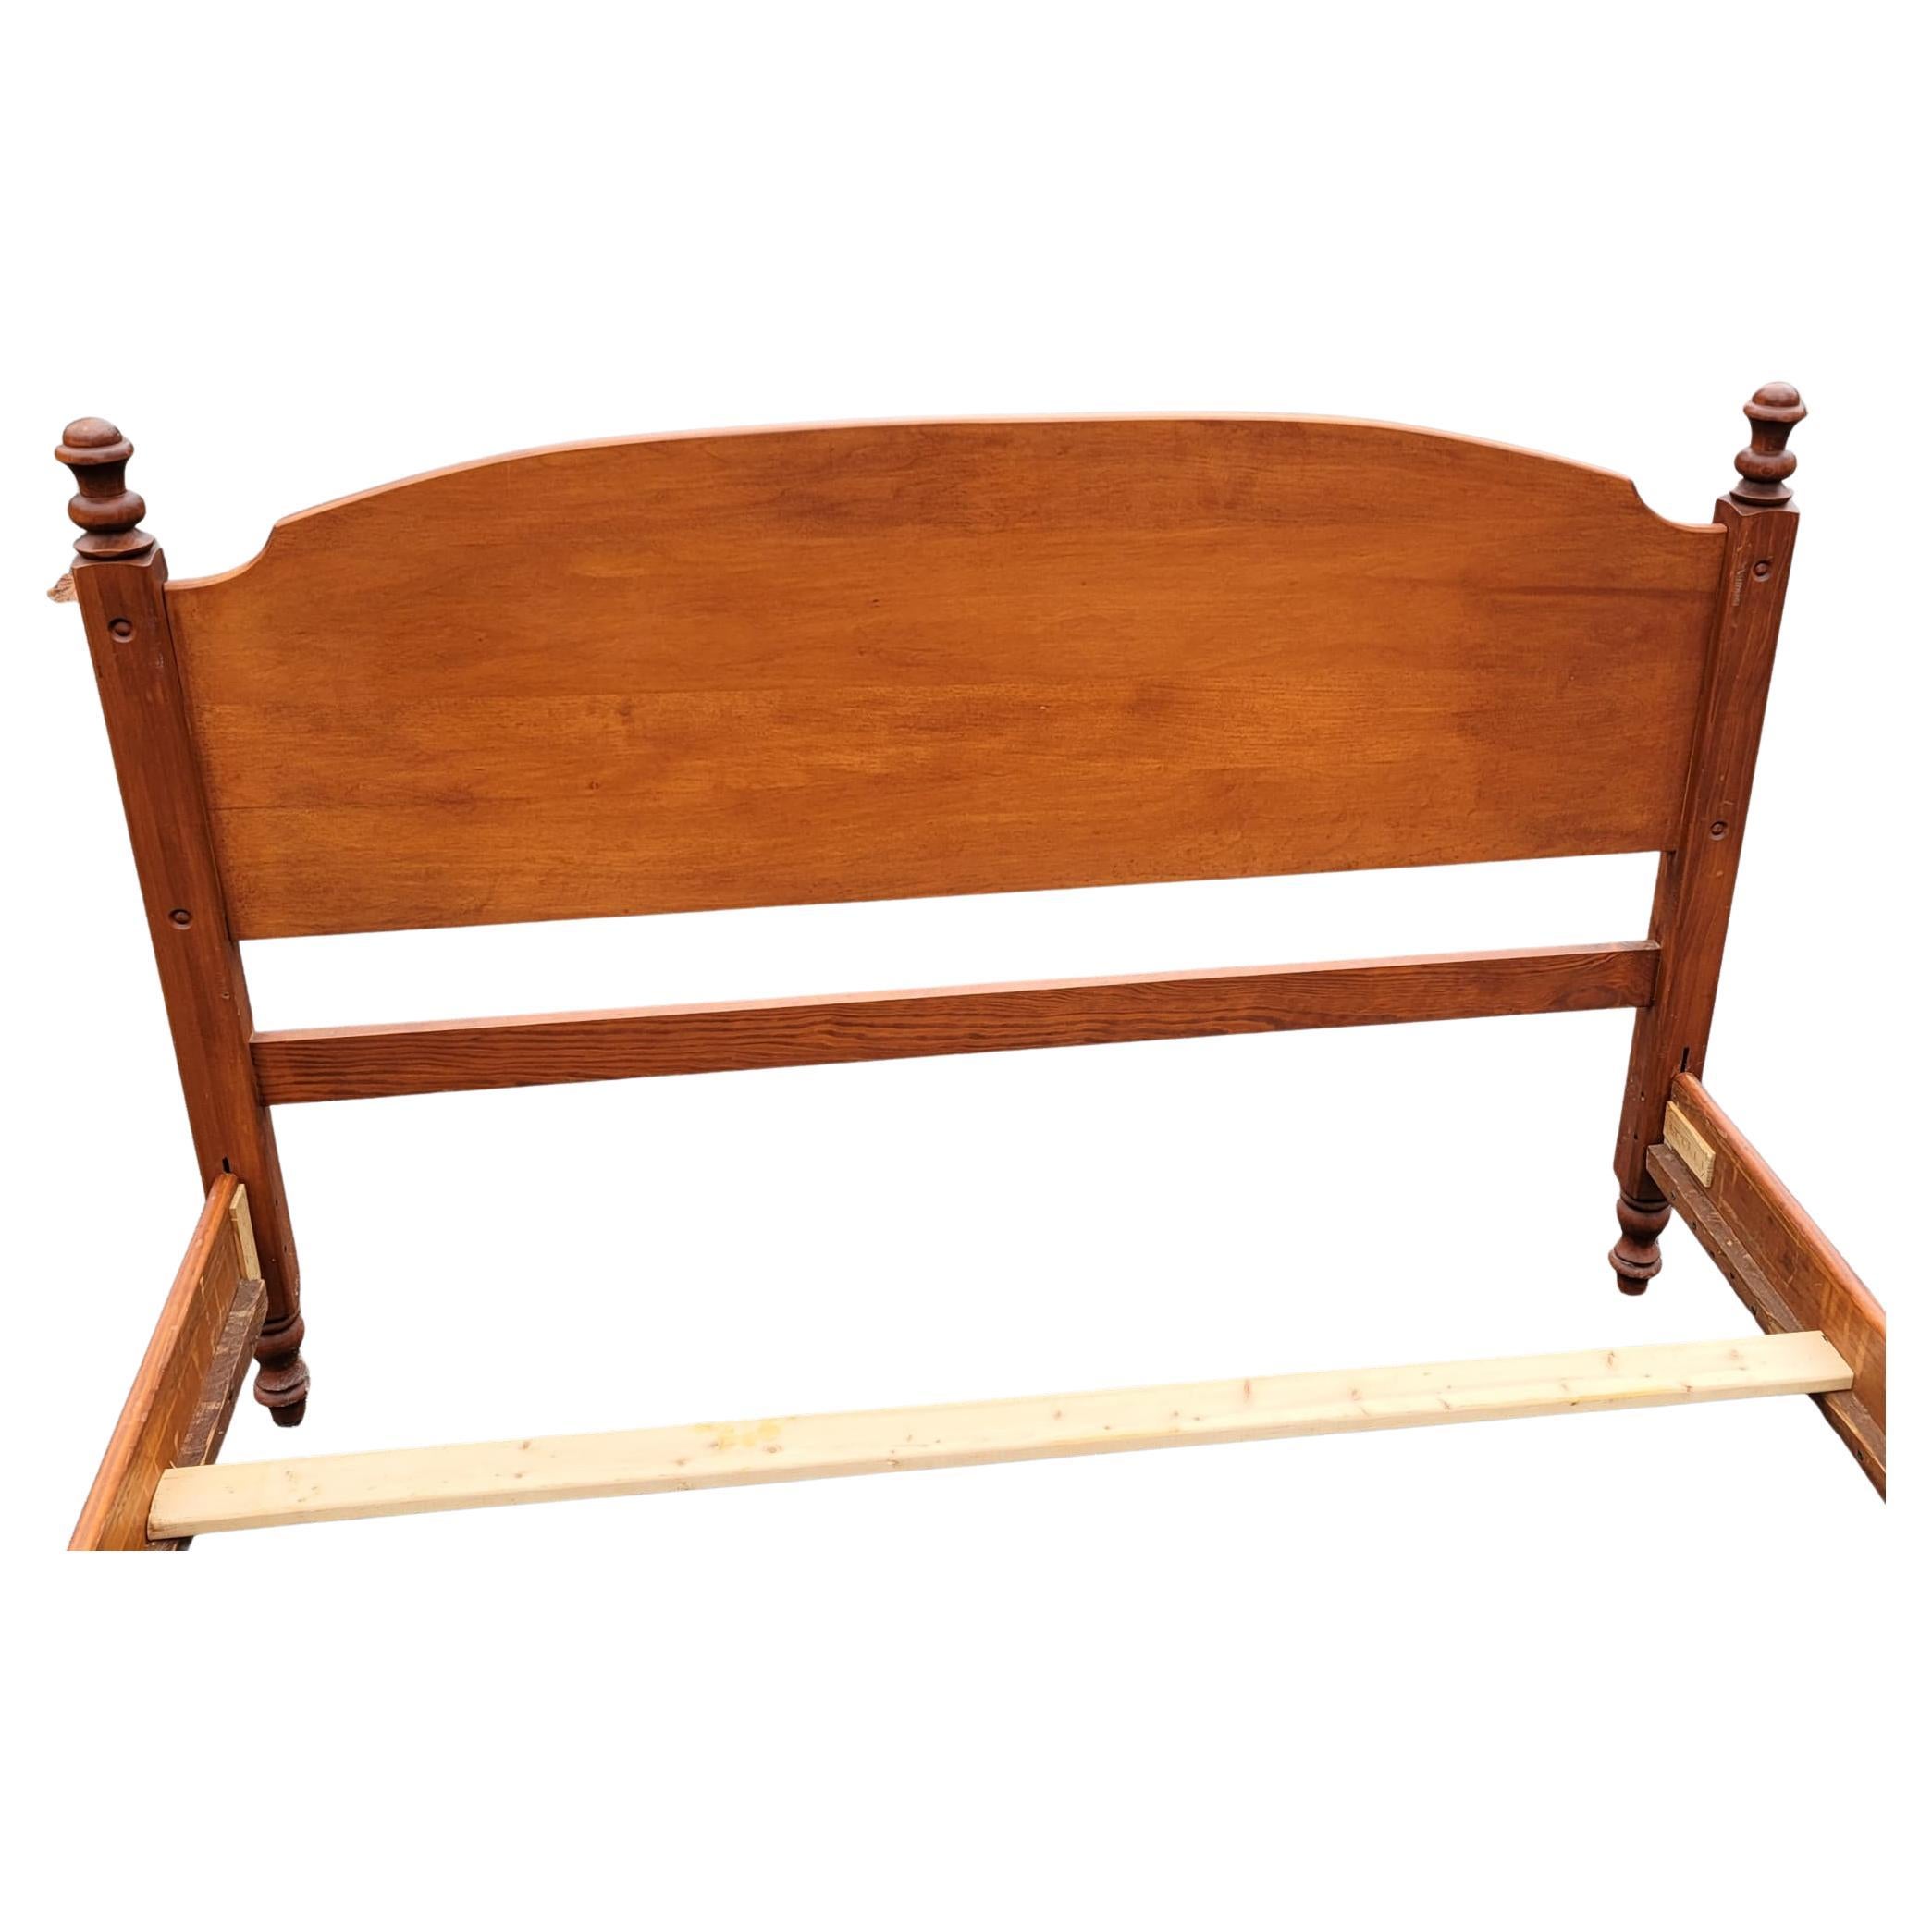 20th Century American Classical Colonial Style Maple Full Size Bedstead